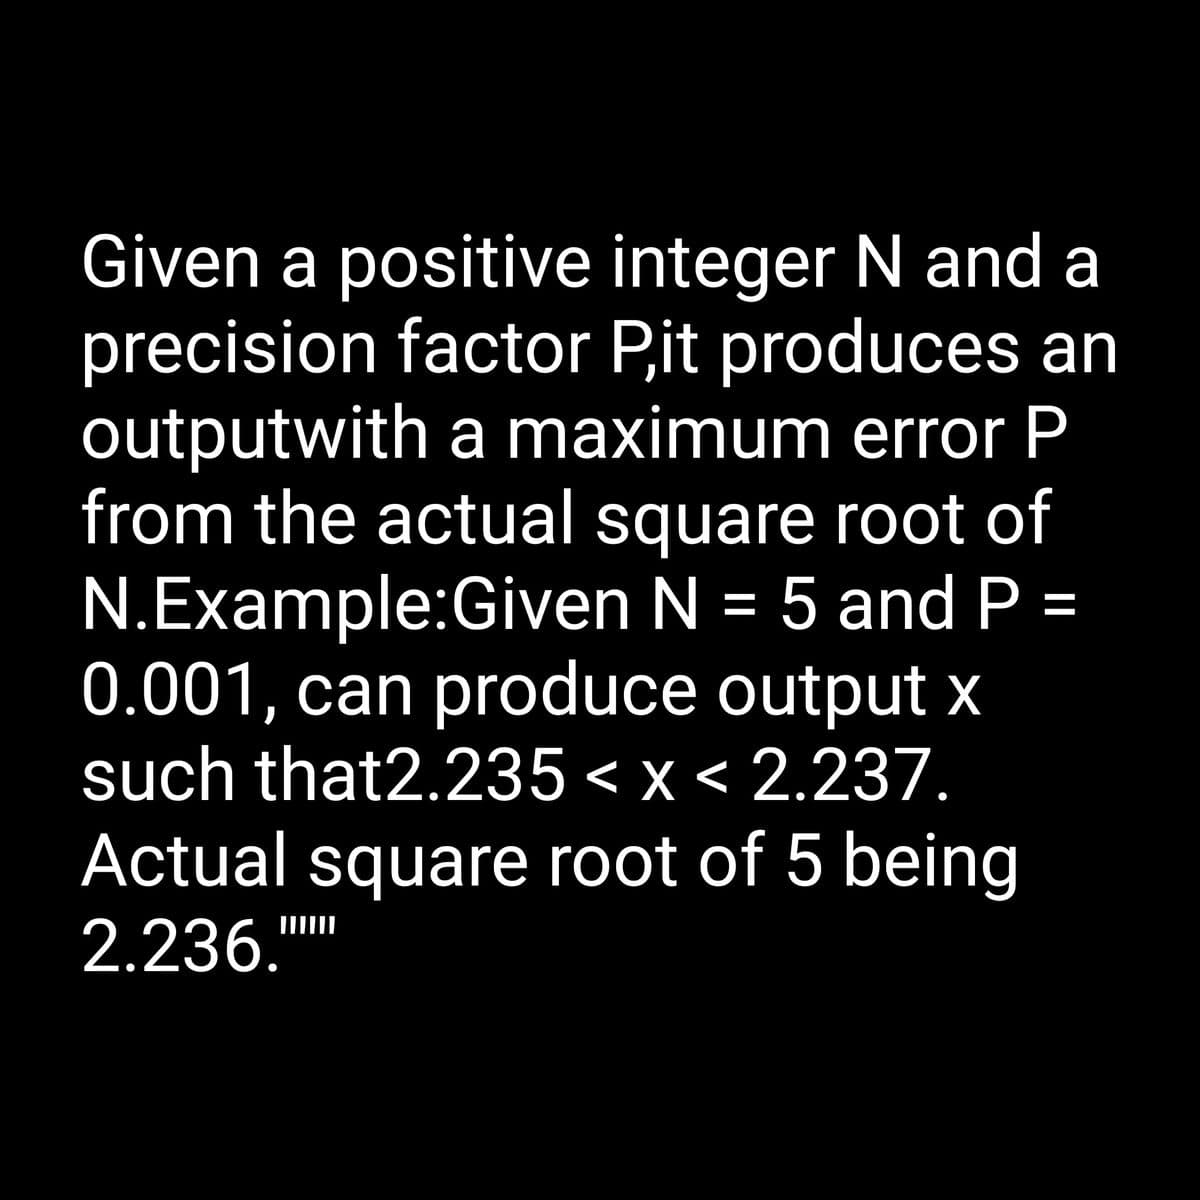 Given a positive integer N and a
precision factor P,it produces an
outputwith a maximum error P
from the actual square root of
N.Example:Given N = 5 and P =
0.001, can produce output x
such that2.235 < x < 2.237.
Actual square root of 5 being
2.236.""